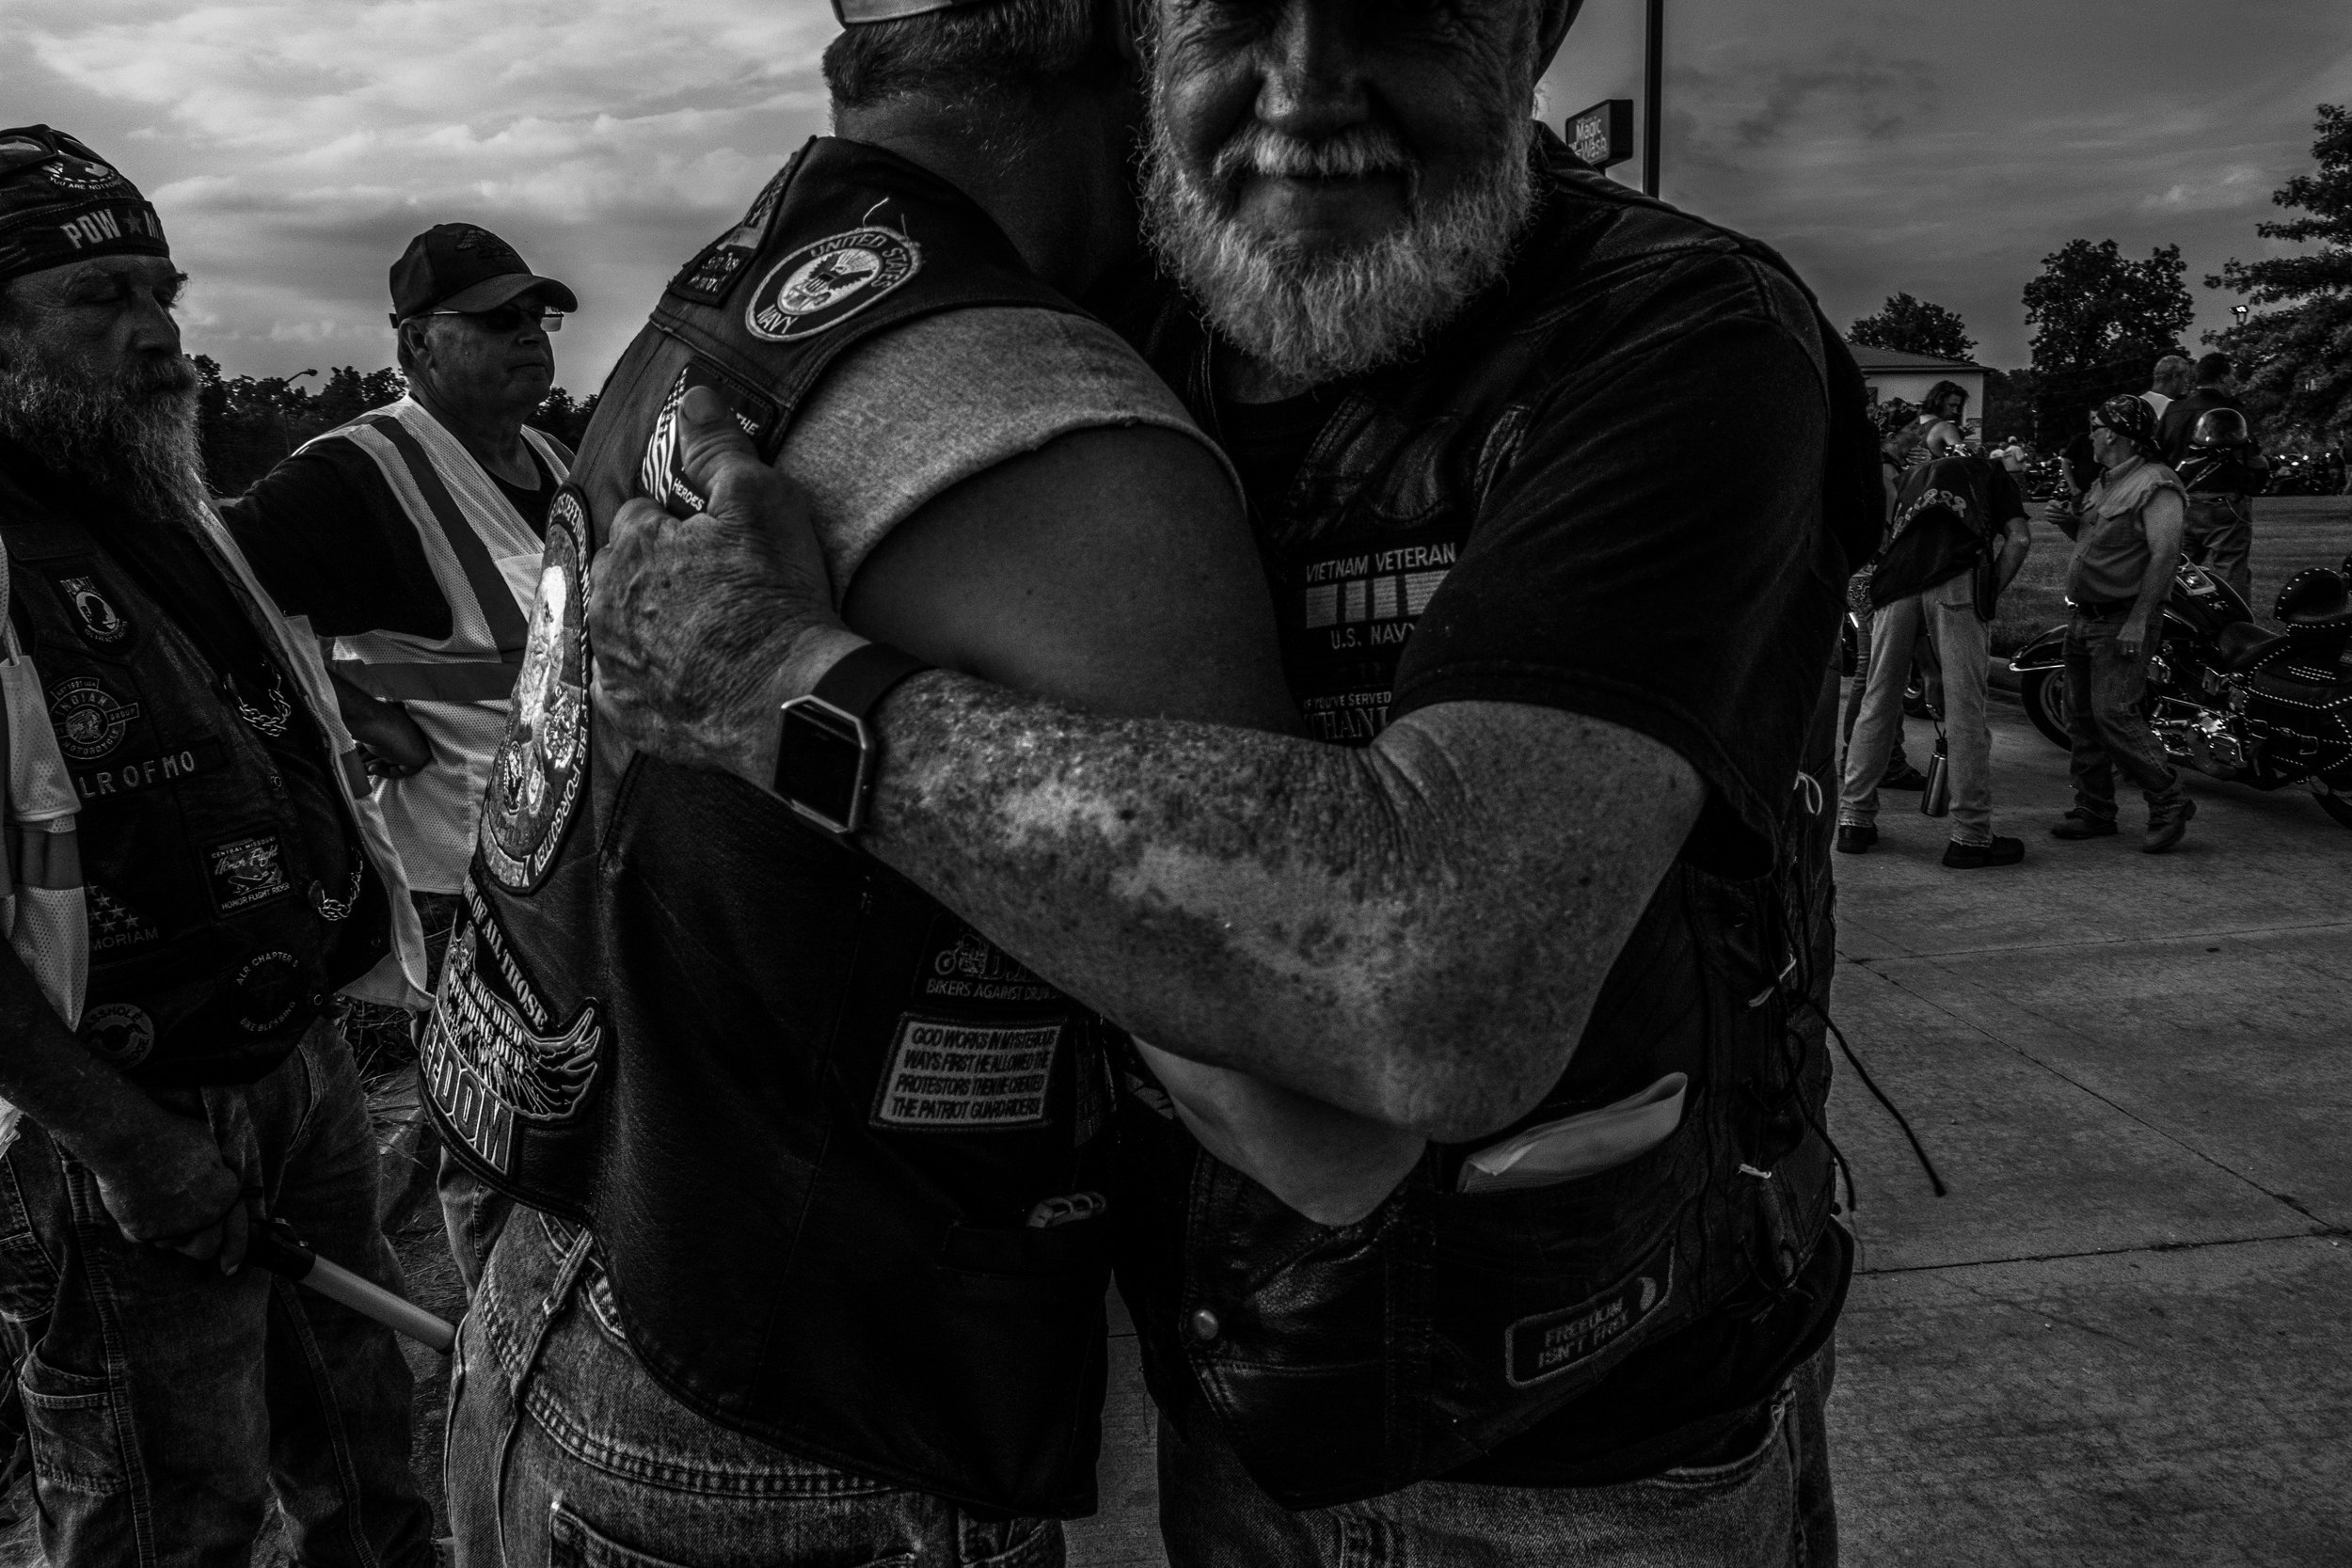  Patriot Guard Riders welcome each other to Honor Flight 58 in Kingdom City, Missouri on Tuesday, Jun. 18, 2019. This Honor Flight ride featured 256 motorcycles for the 26 mile escort to the Marriott Hotel in Columbia, Missouri. 